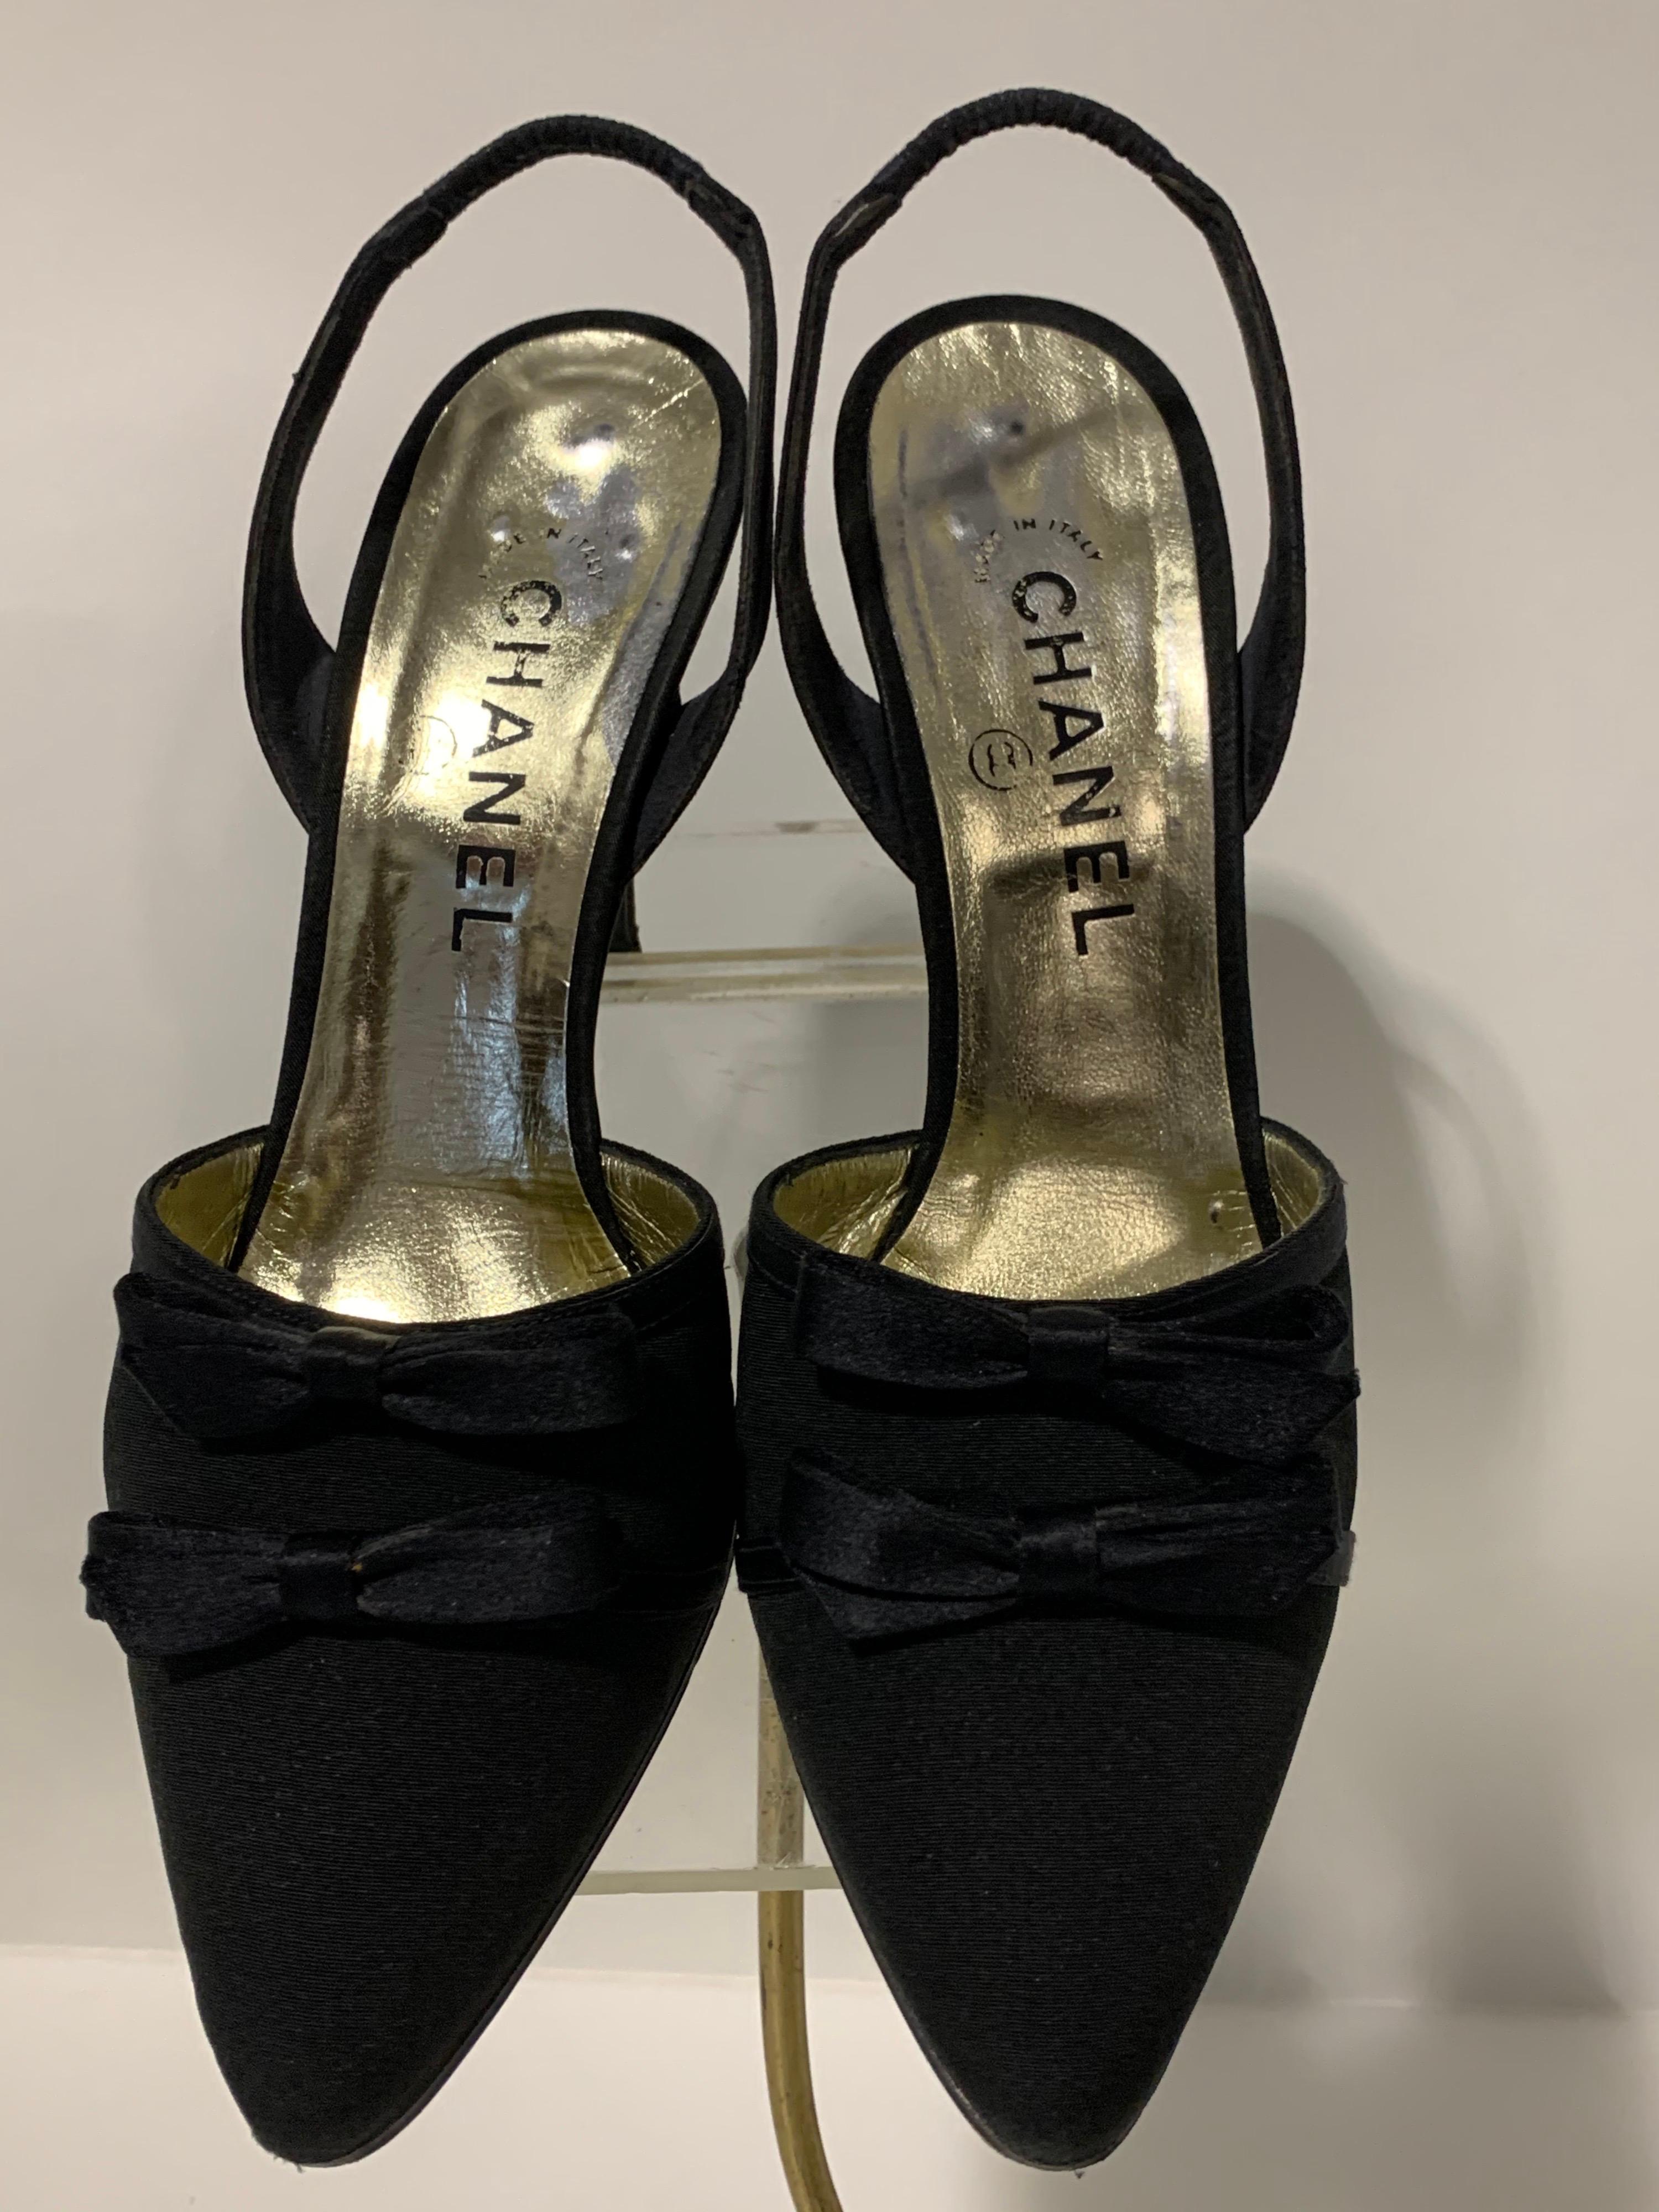 1980 Chanel Black Silk Fabric Slingback Shoe W/Satin Bows Size 7M In Good Condition For Sale In Gresham, OR